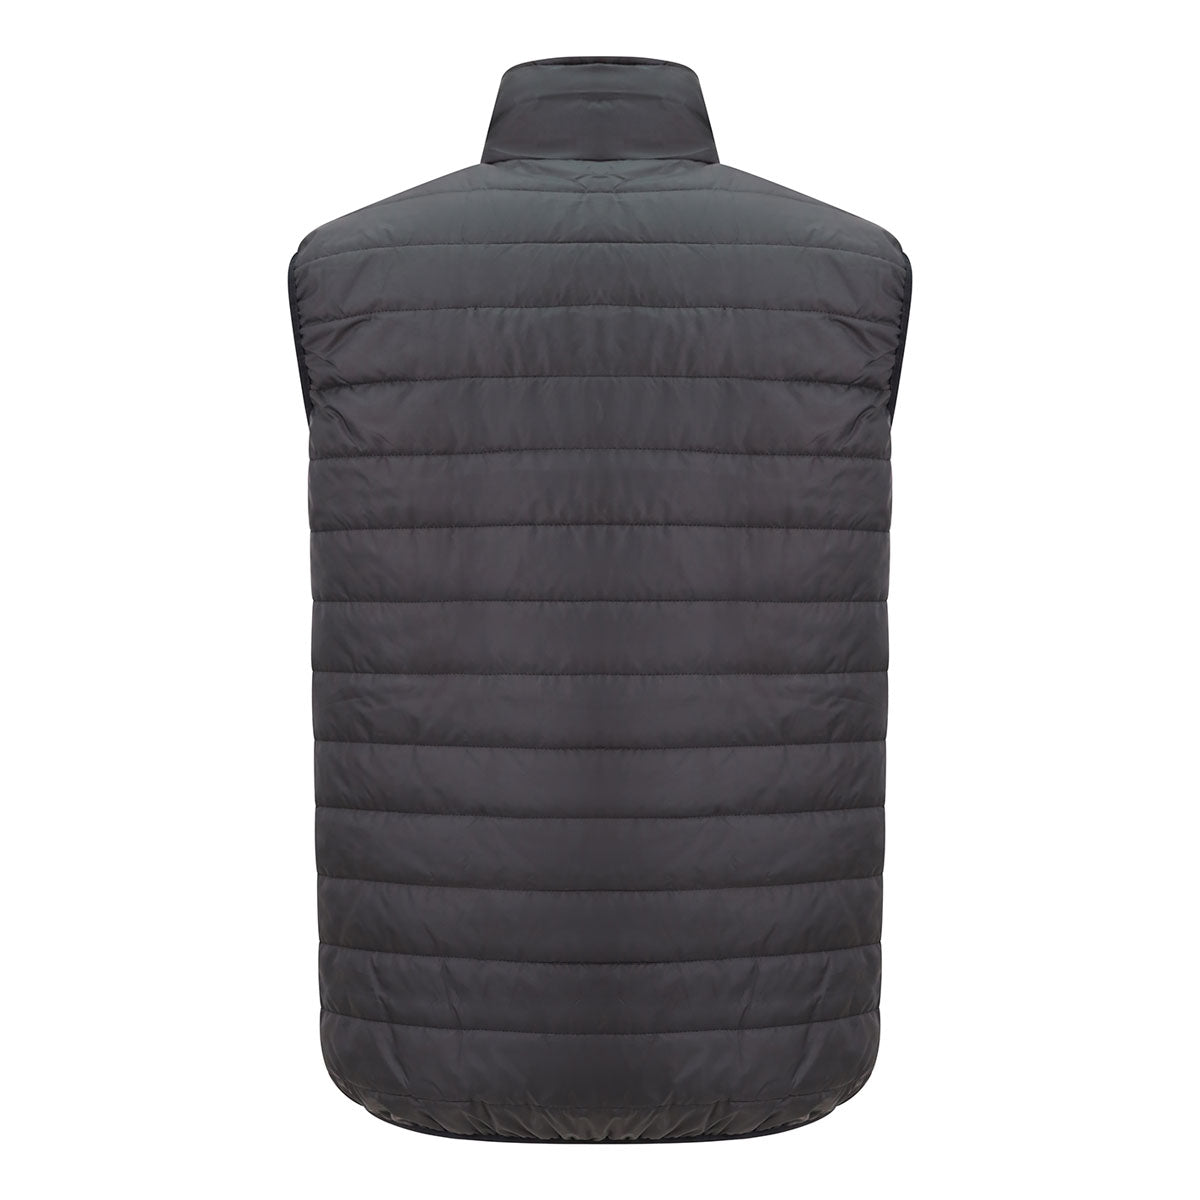 Mc Keever The Association of Irish Celtic Supporters Clubs Core 22 Padded Gilet - Youth - Black